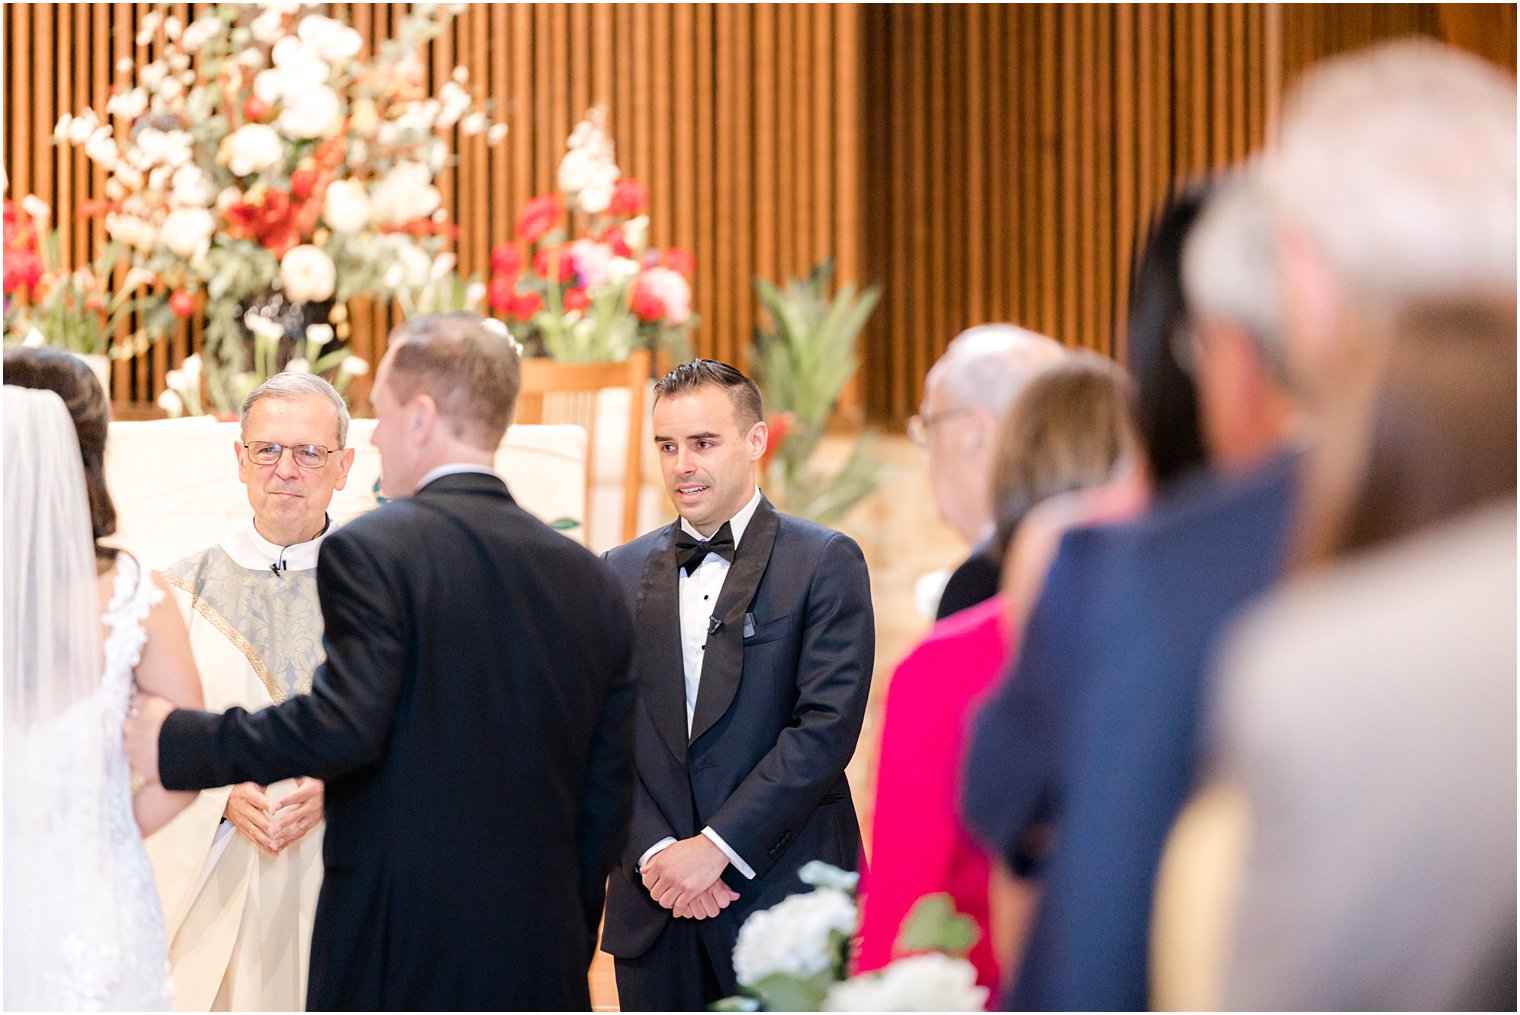 groom watches bride approach alter for traditional church wedding ceremony in New Jersey